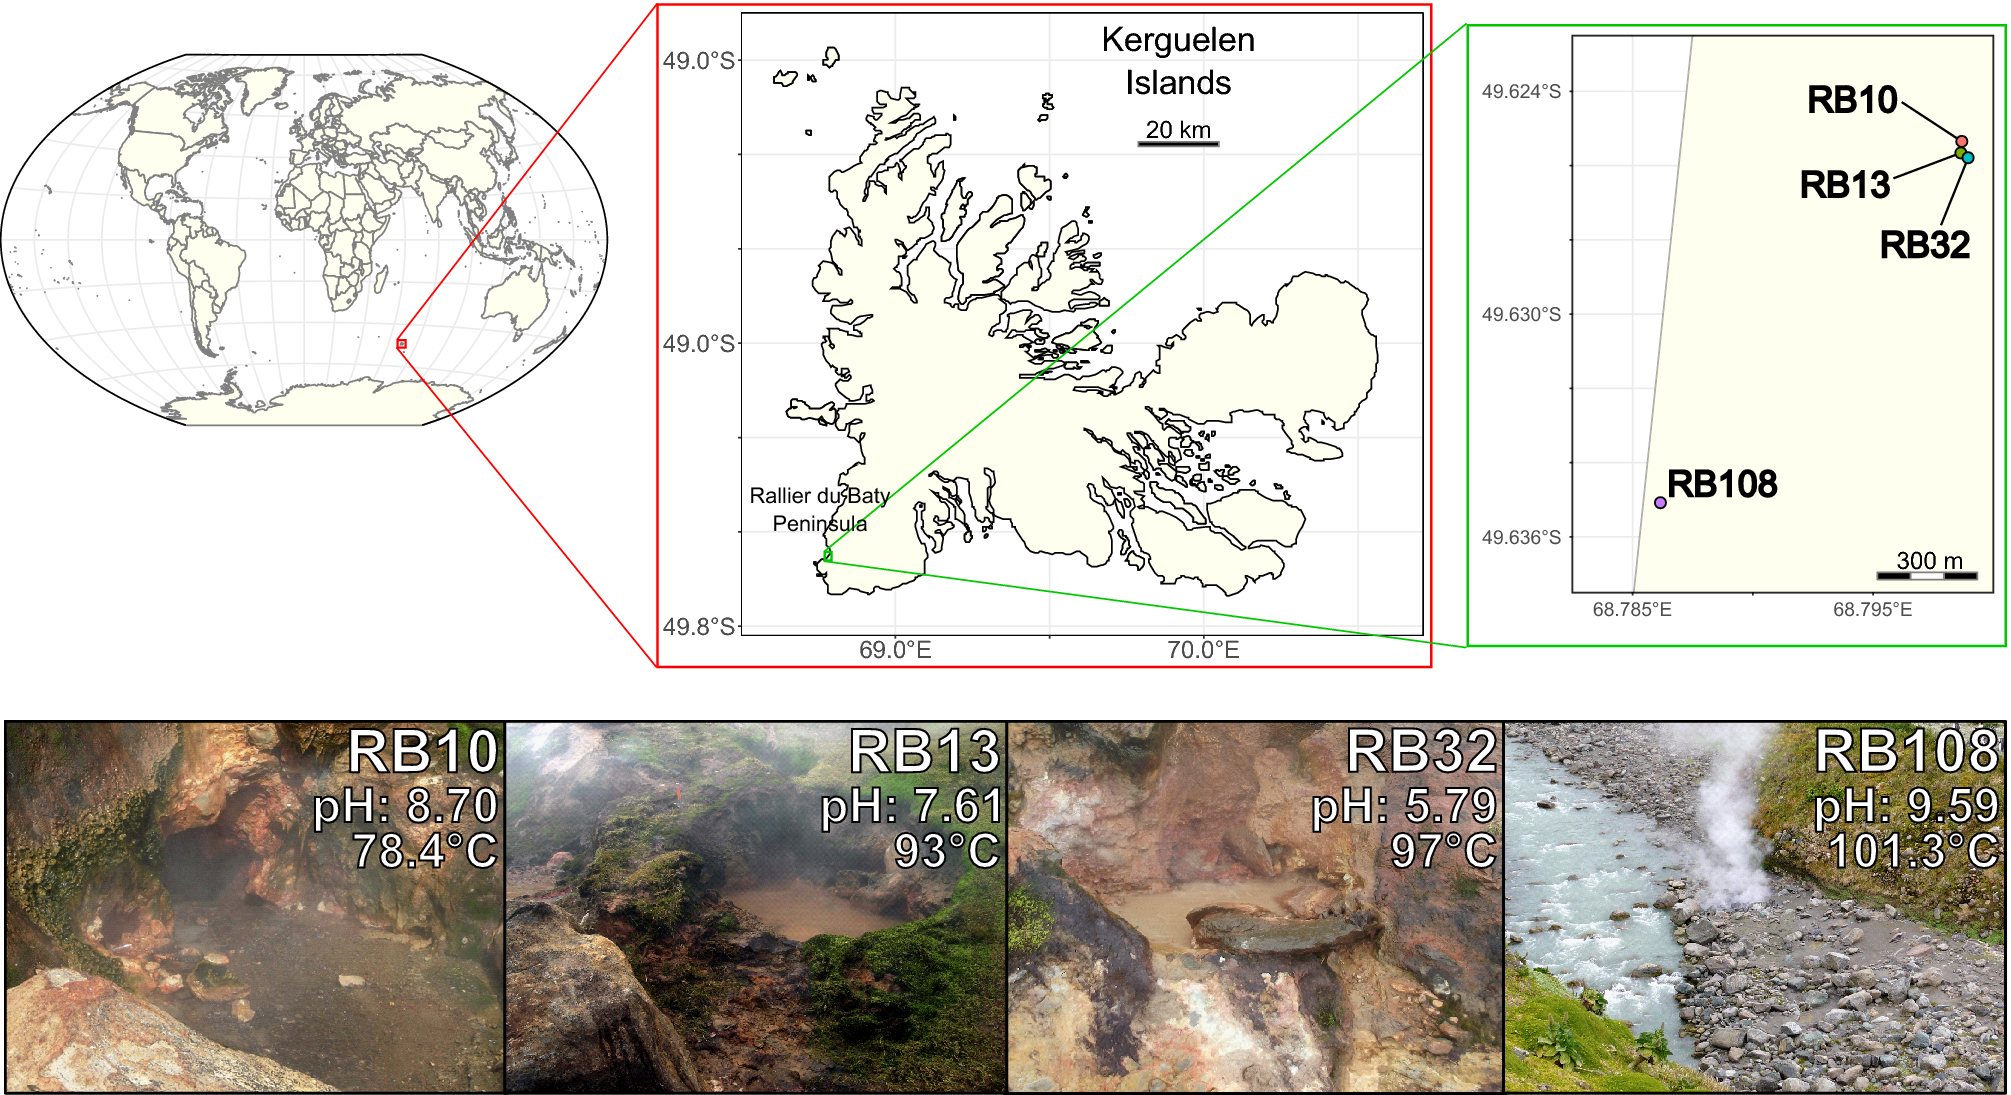 A metagenomic insight into the microbiomes of geothermal springs in the  Subantarctic Kerguelen Islands | Scientific Reports